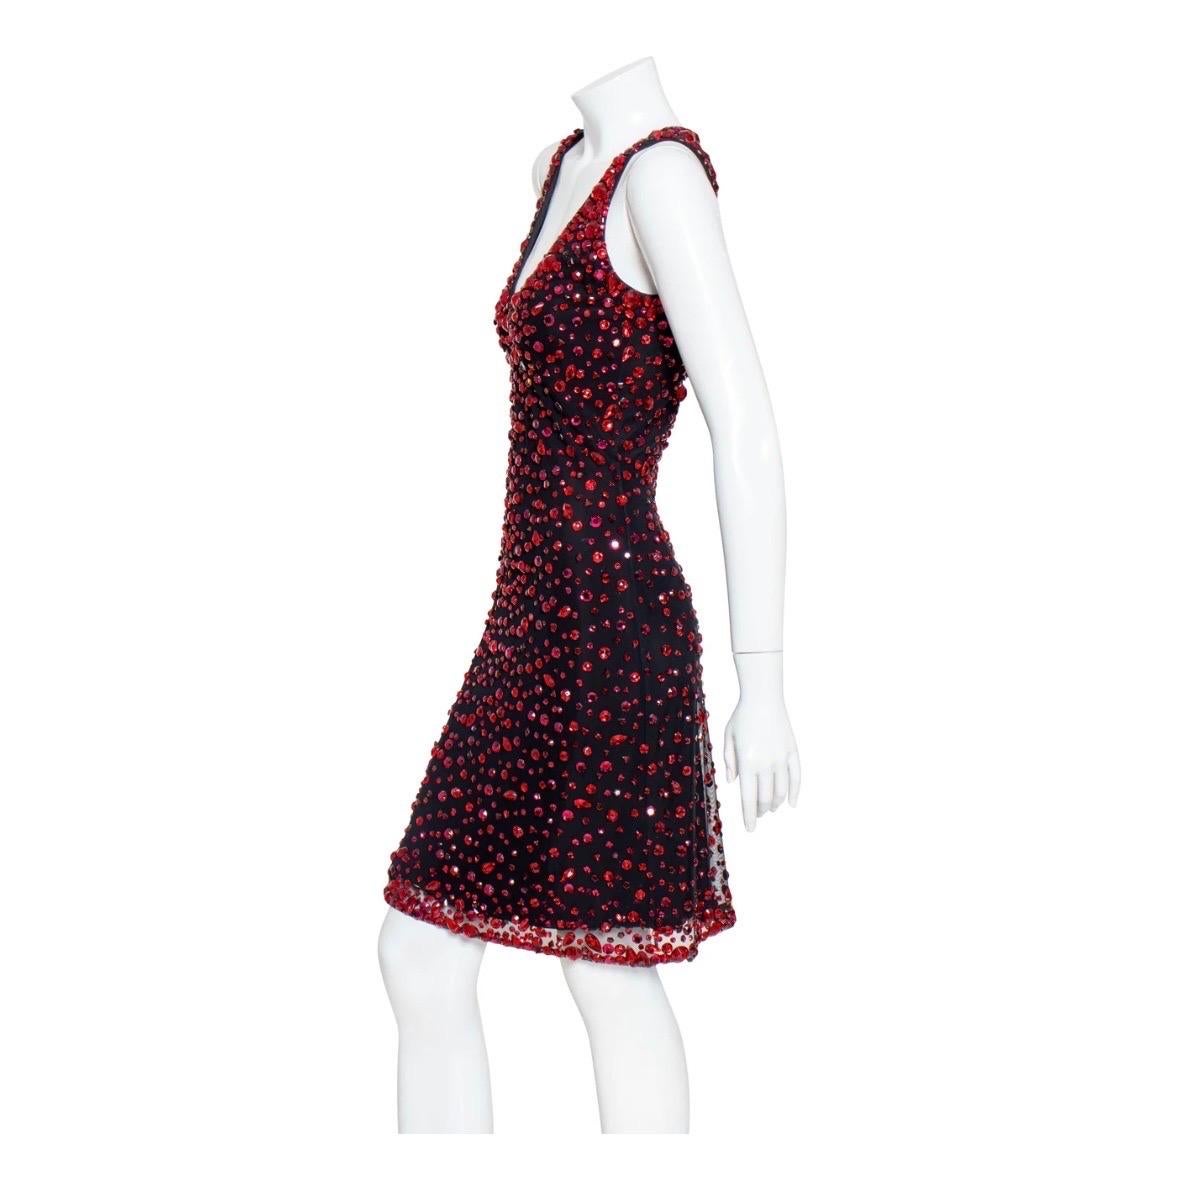 Red crystal dress by CD Greene
Black background
Sleeveless
Allover red crystals
Mesh topper
A-line bodycon silhouette
Scoop neckline
Back cutout with strap
Hook and eye closure on neck and back
Above-knee length
Fabric Composition: unknown; likely a